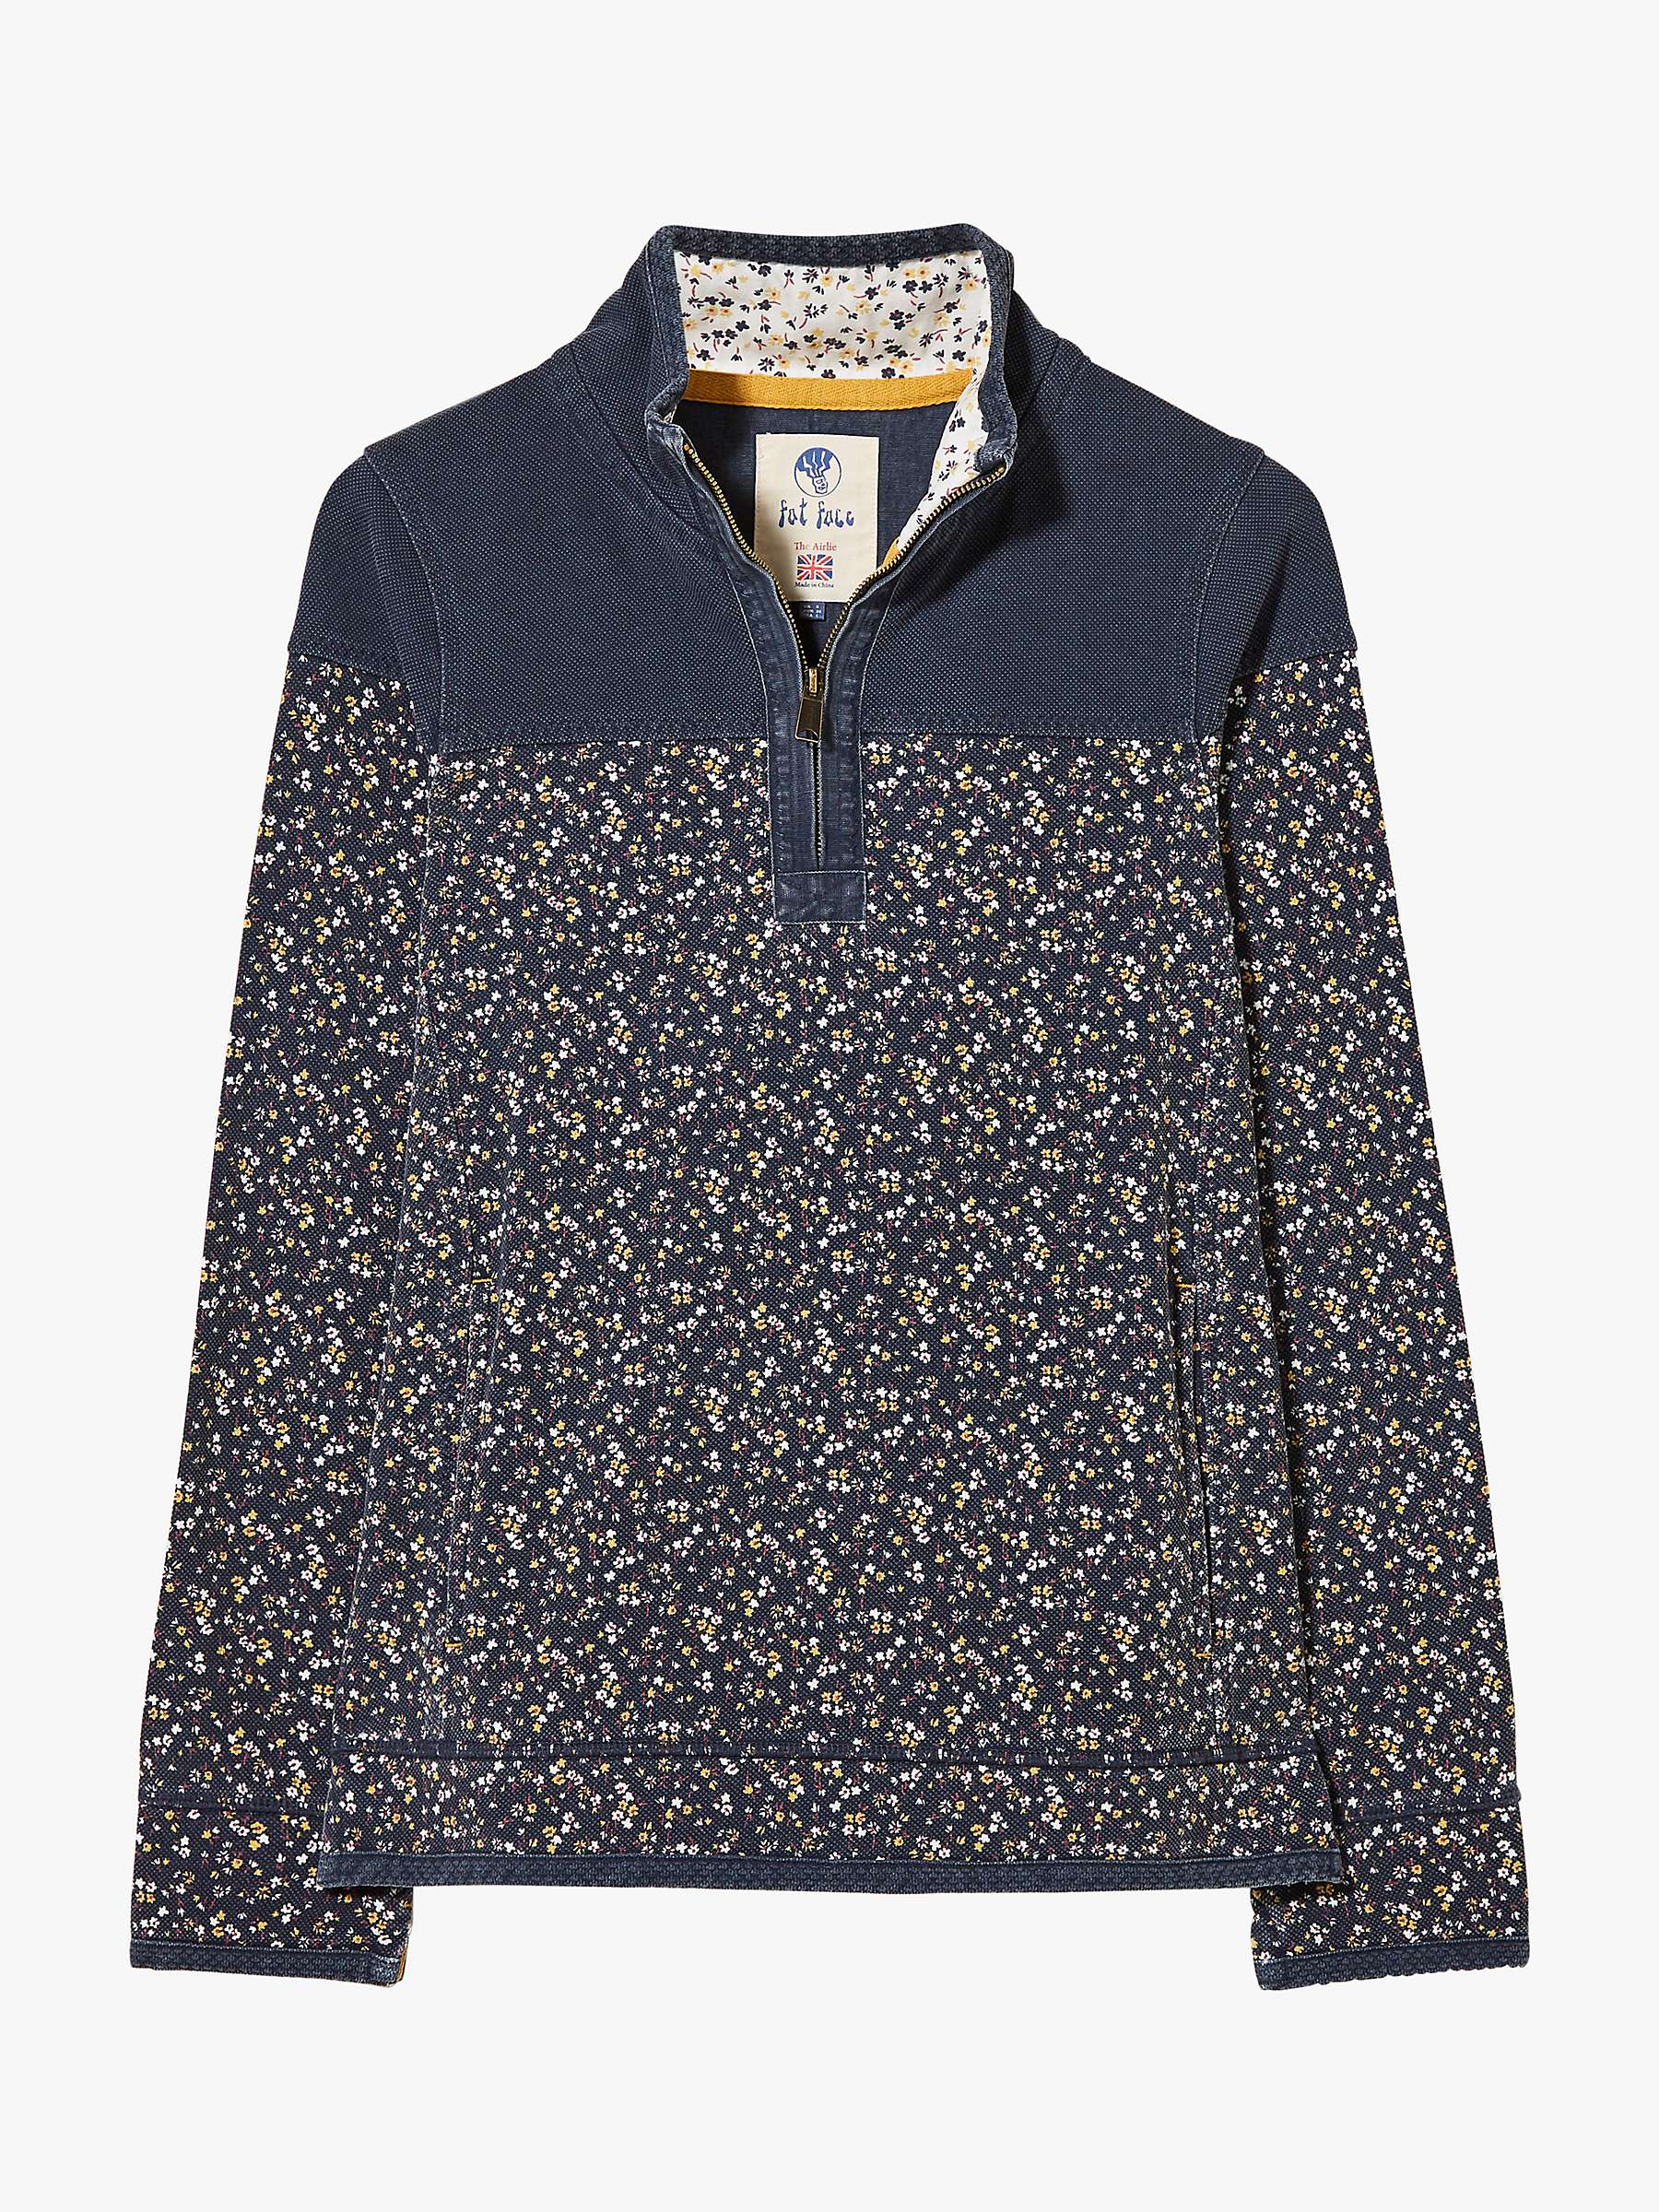 Buy FatFace Airlie Floral Print Half Zip Sweatshirt, Chambray Online at johnlewis.com